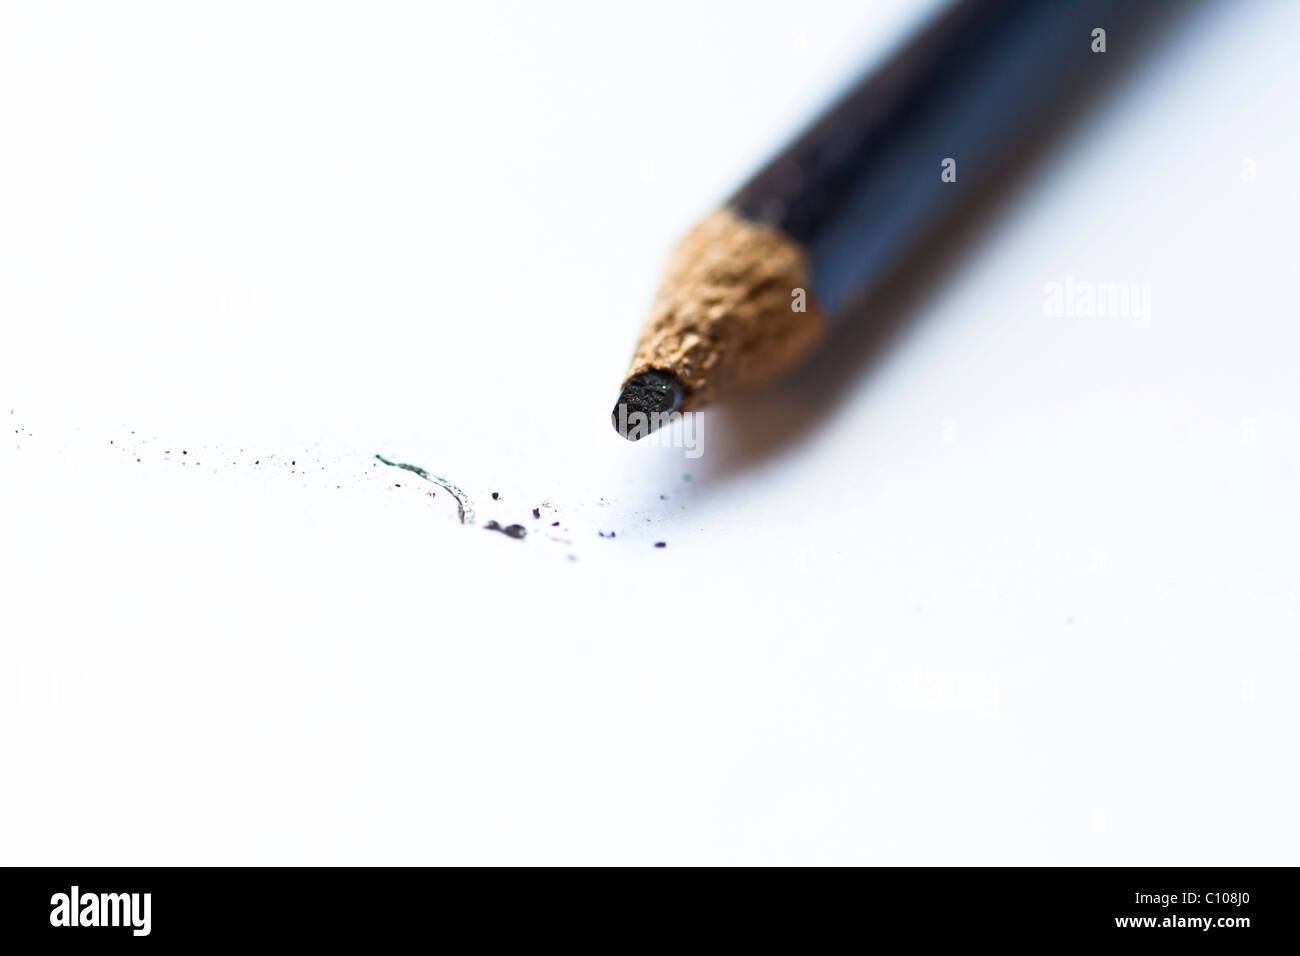 Pencil with broken point. Very shallow depth of field Stock Photo